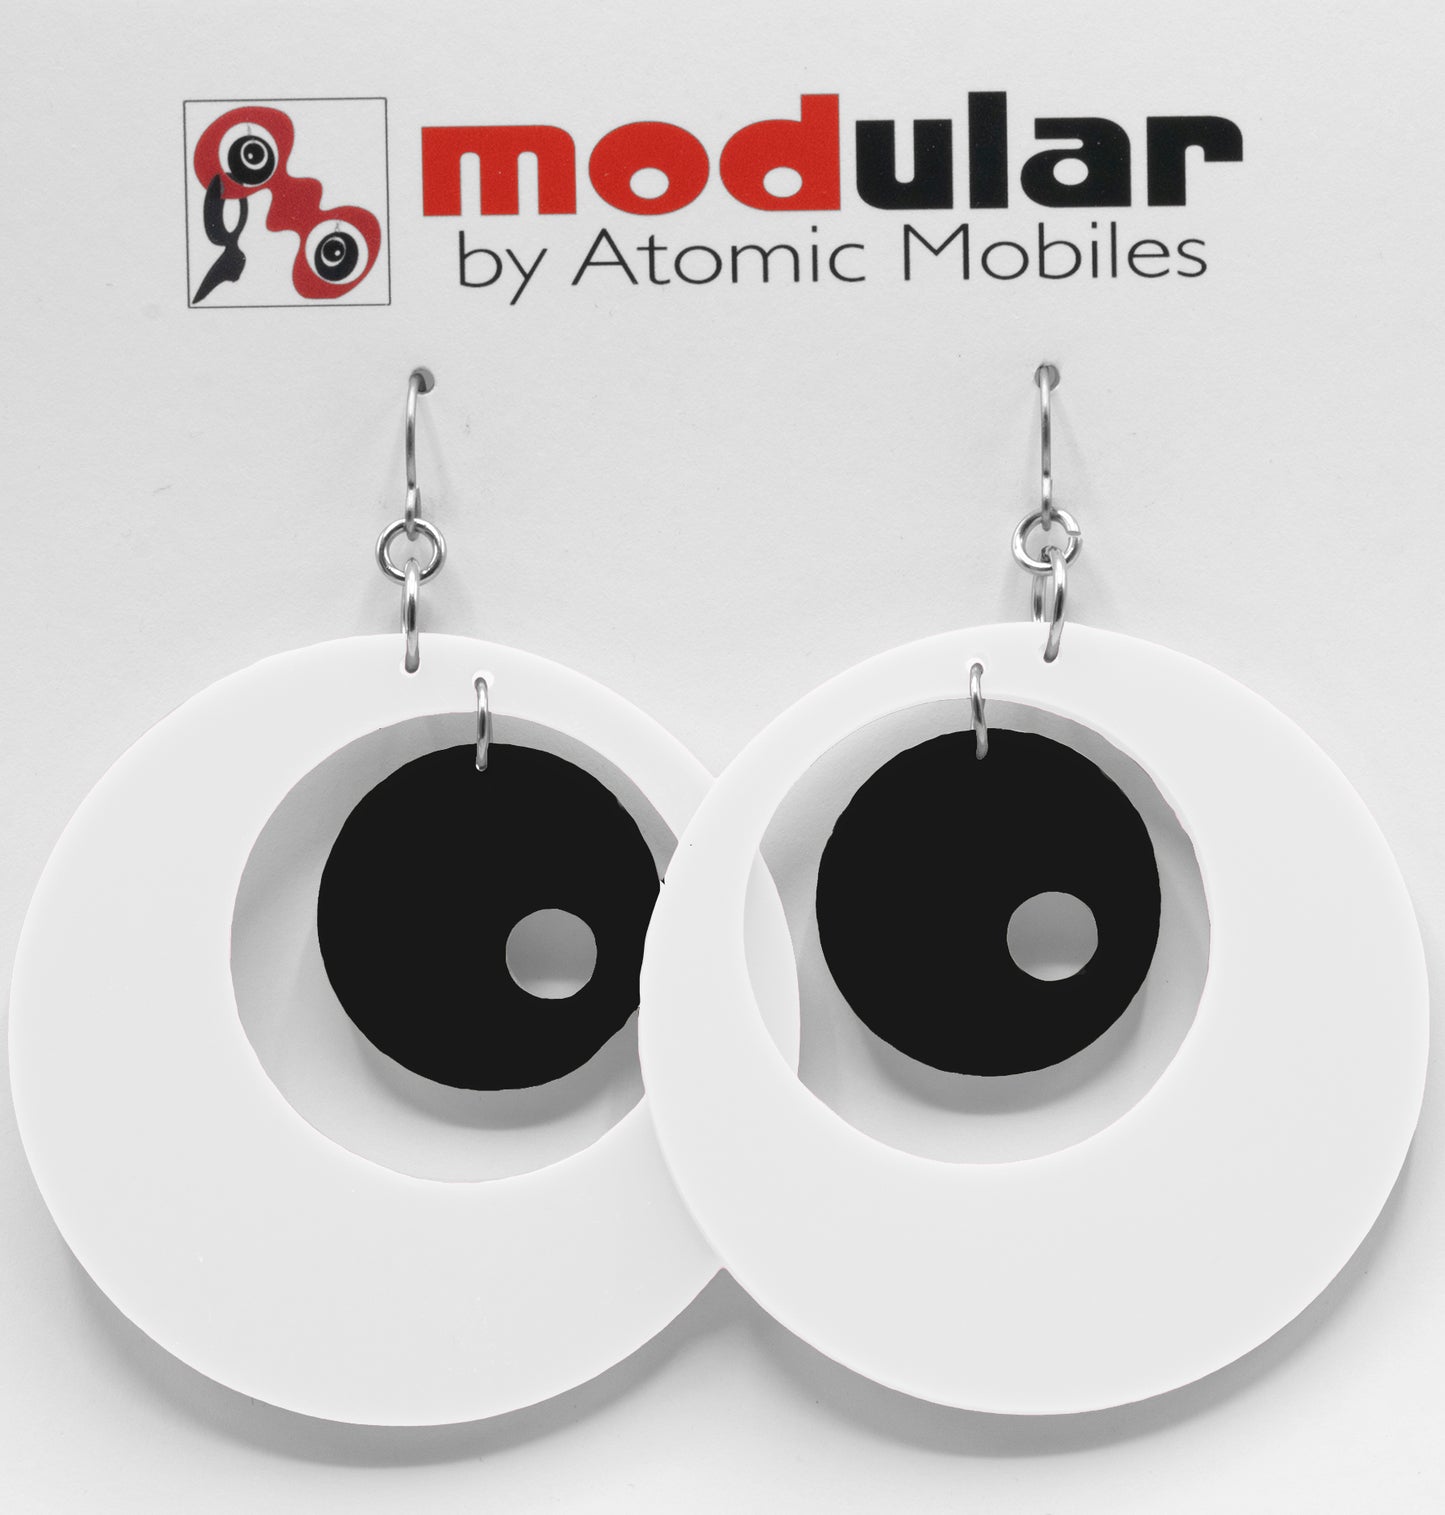 MODular Earrings - Groovy Statement Earrings in White and Black by AtomicMobiles.com - retro era inspired mod handmade jewelry